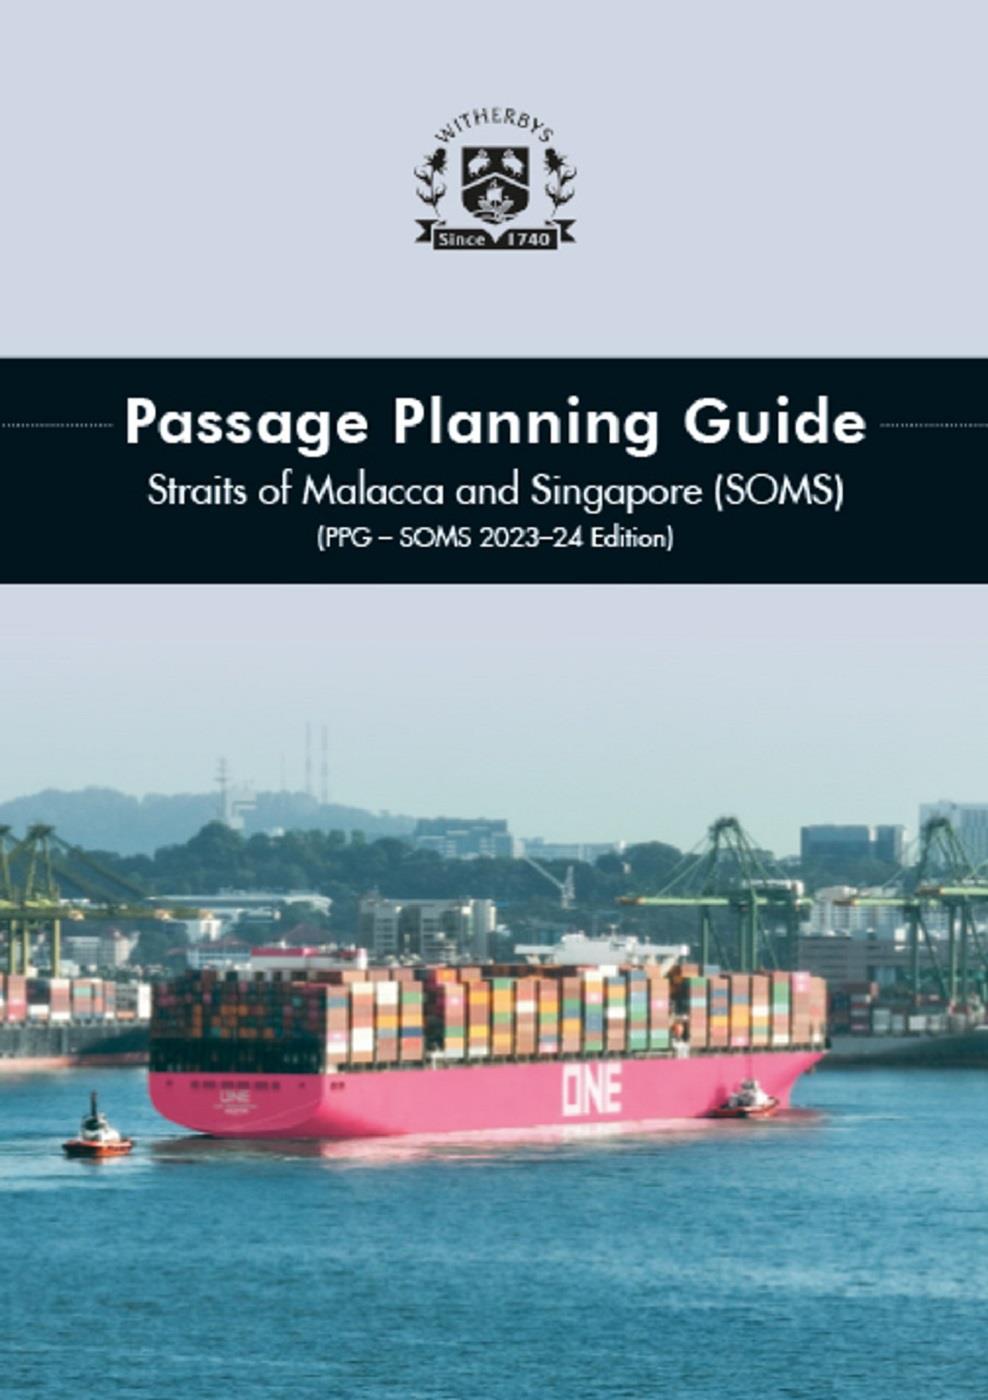 Passage Planning Guide - Straits of Malacca and Singapore (SOMS)